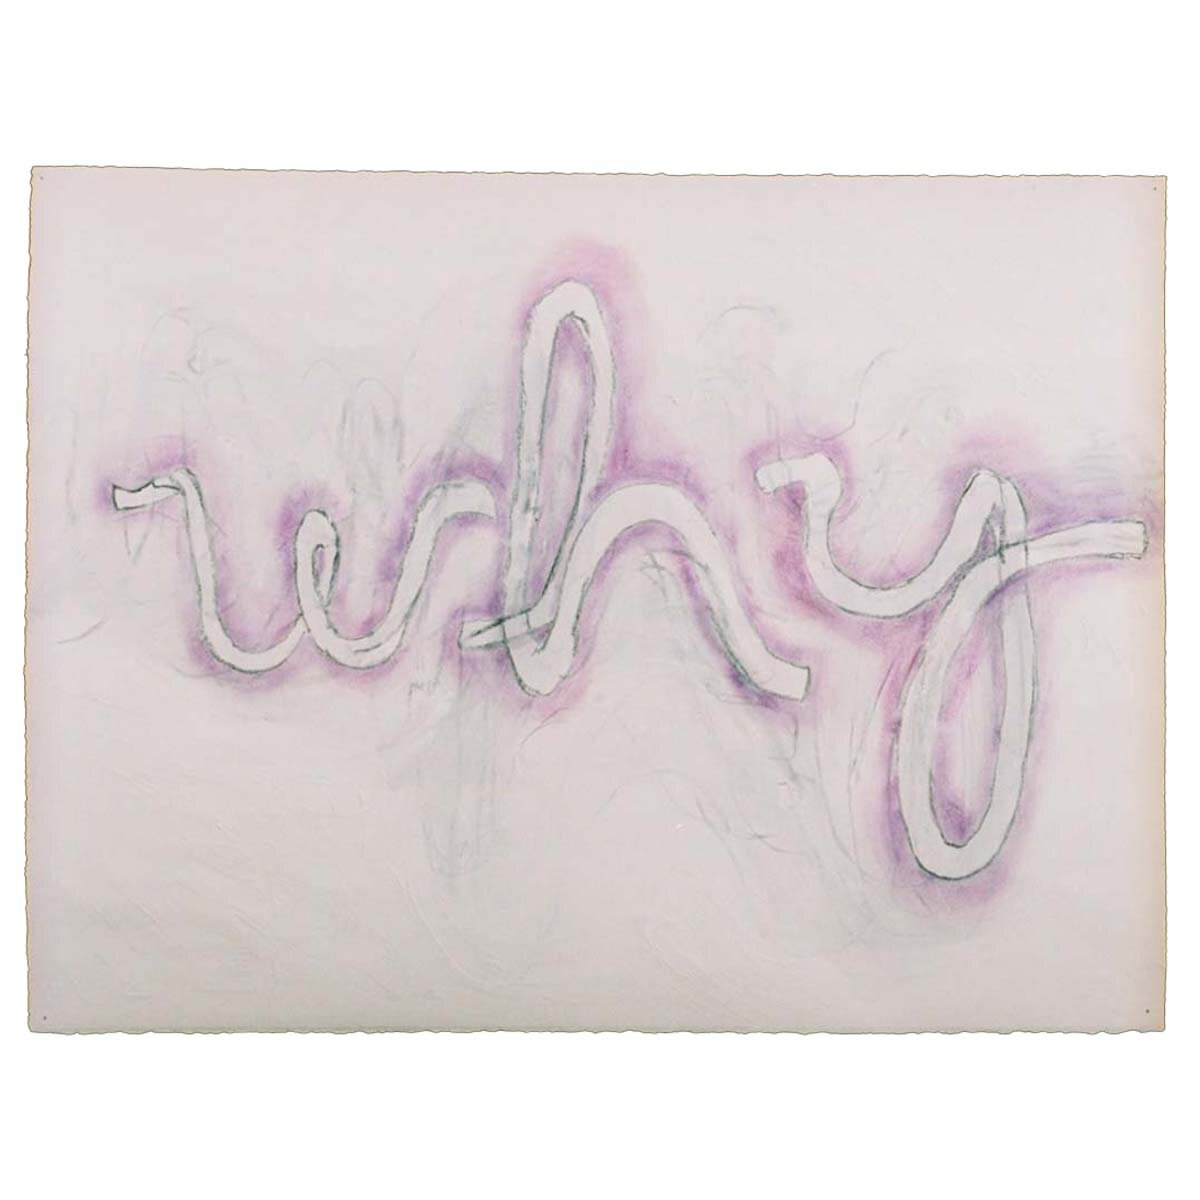 why over why, 2005